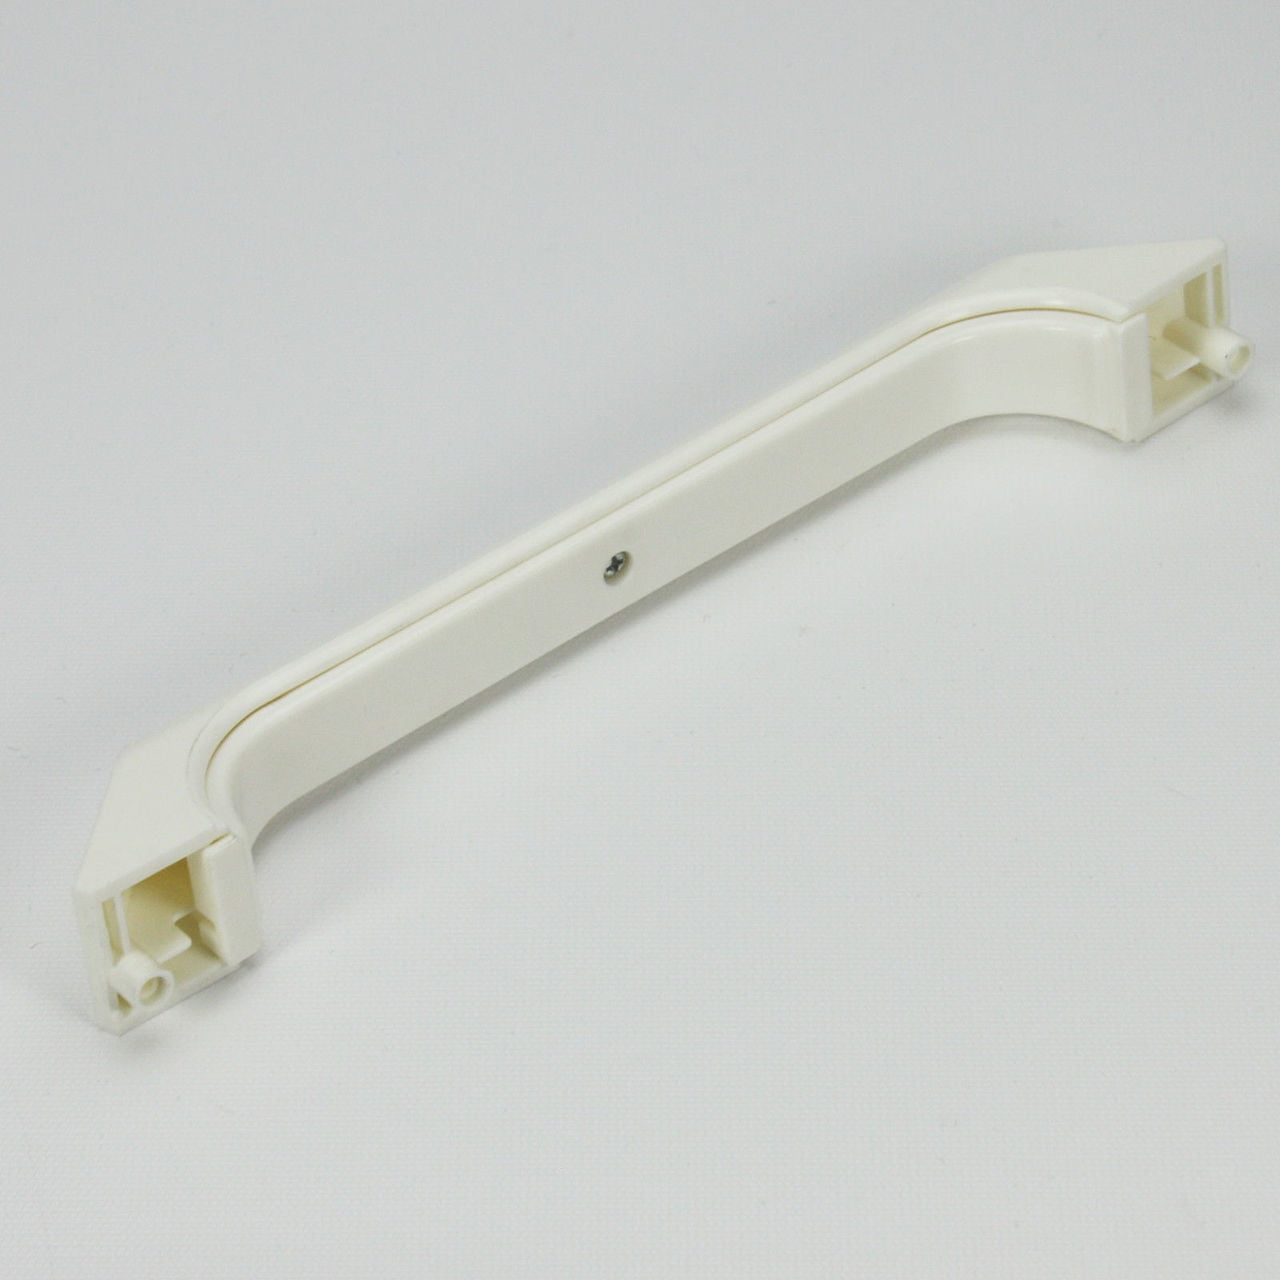 WB15X321 Microwave Door Handle Replacement For GE AP2021139 PS232251 25QBP3821 